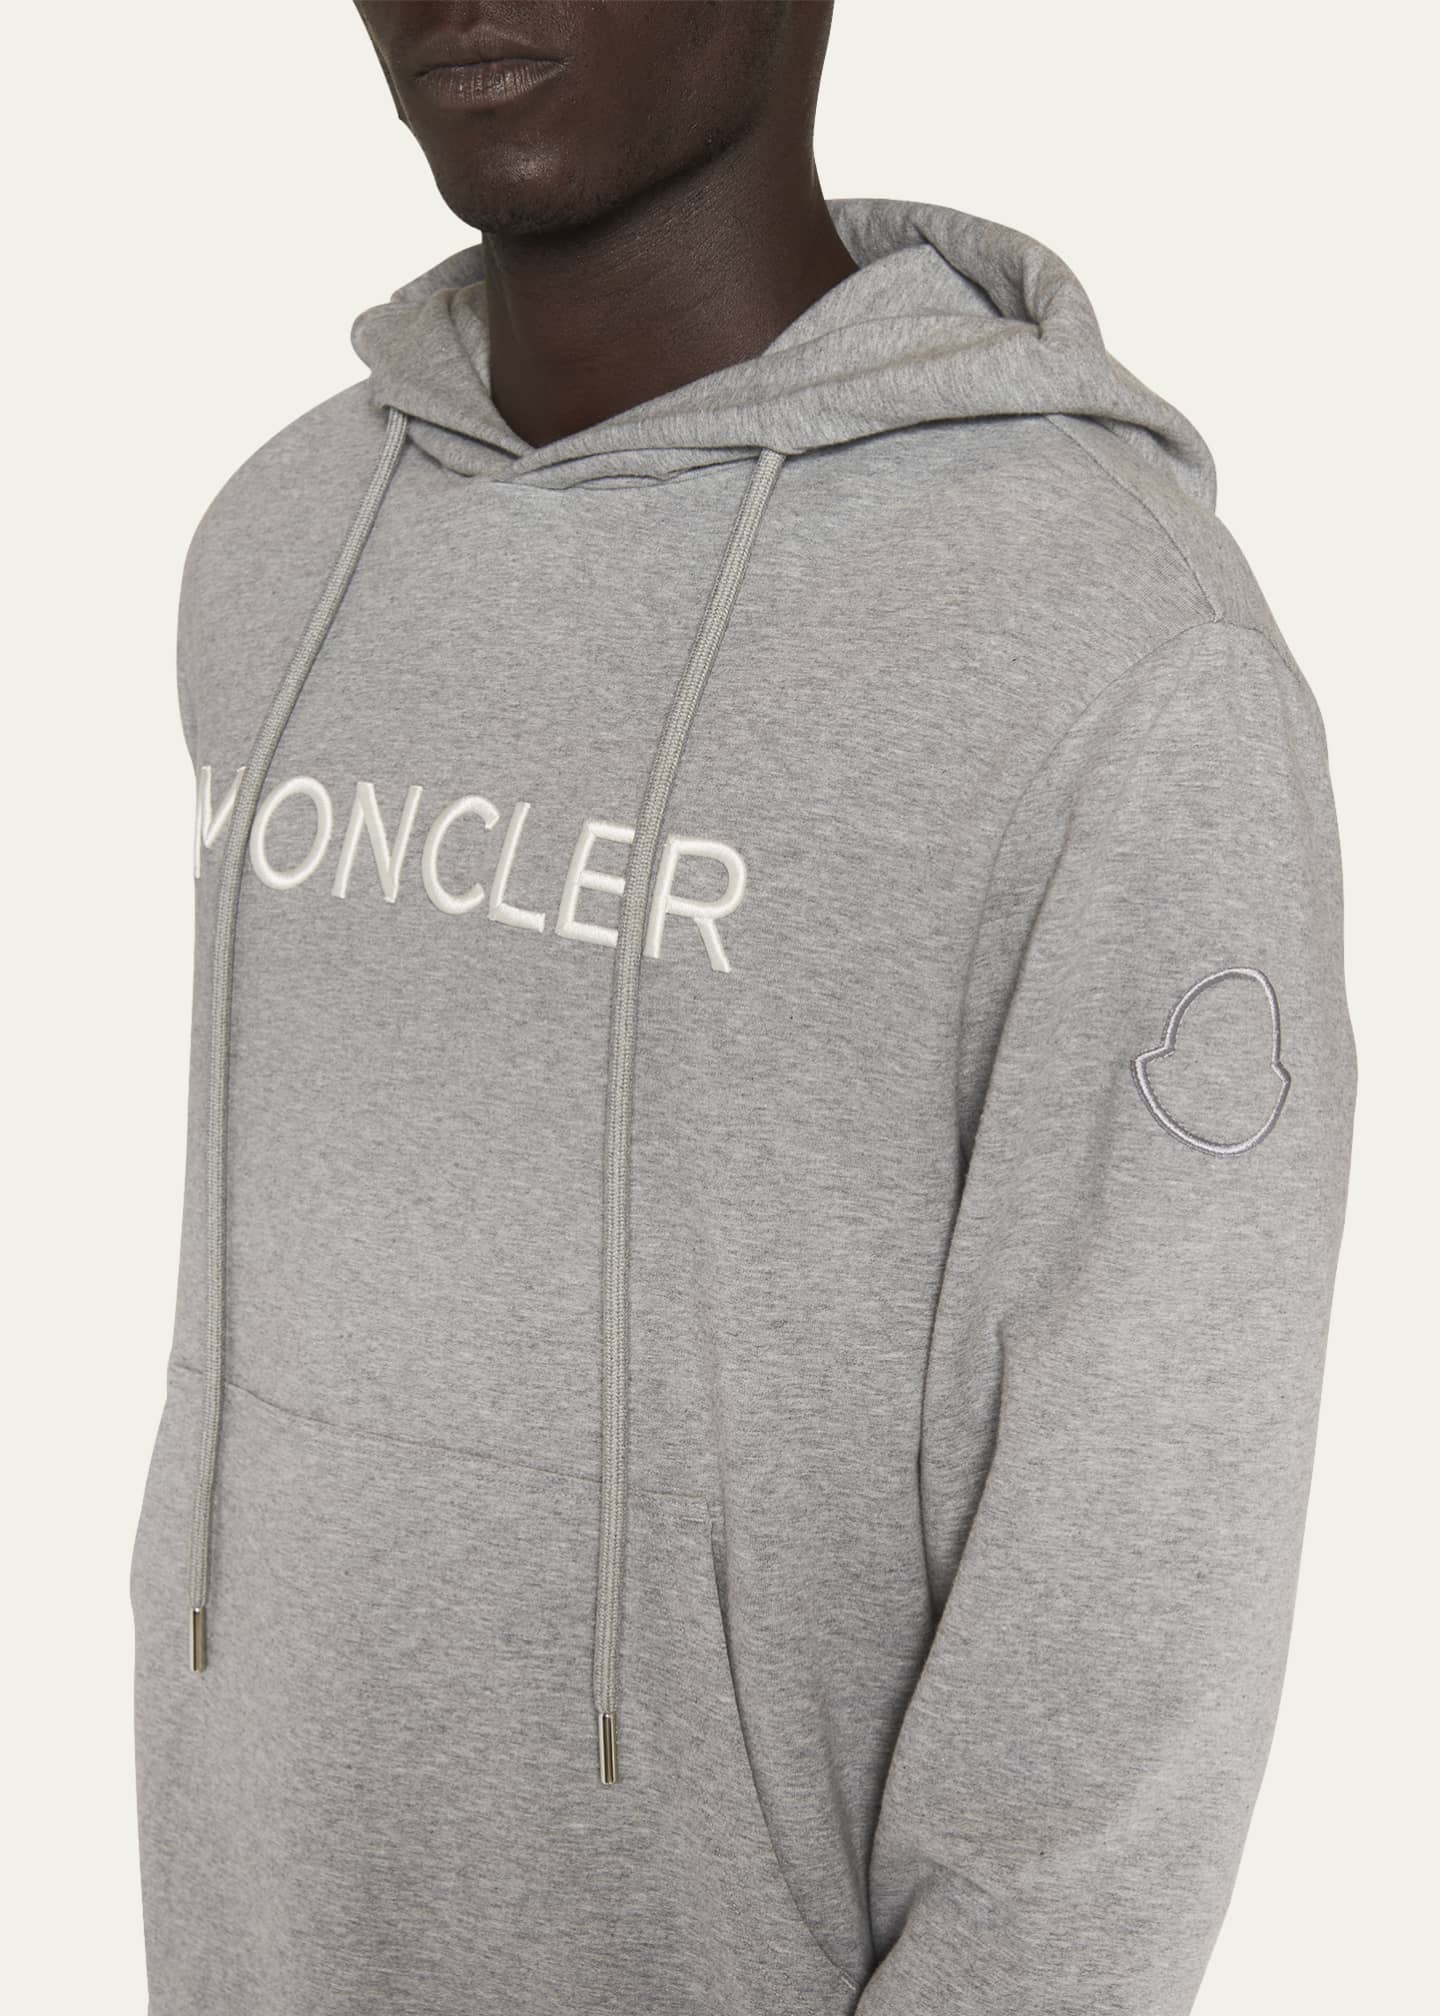 Moncler Men's Embroidered Logo Hoodie